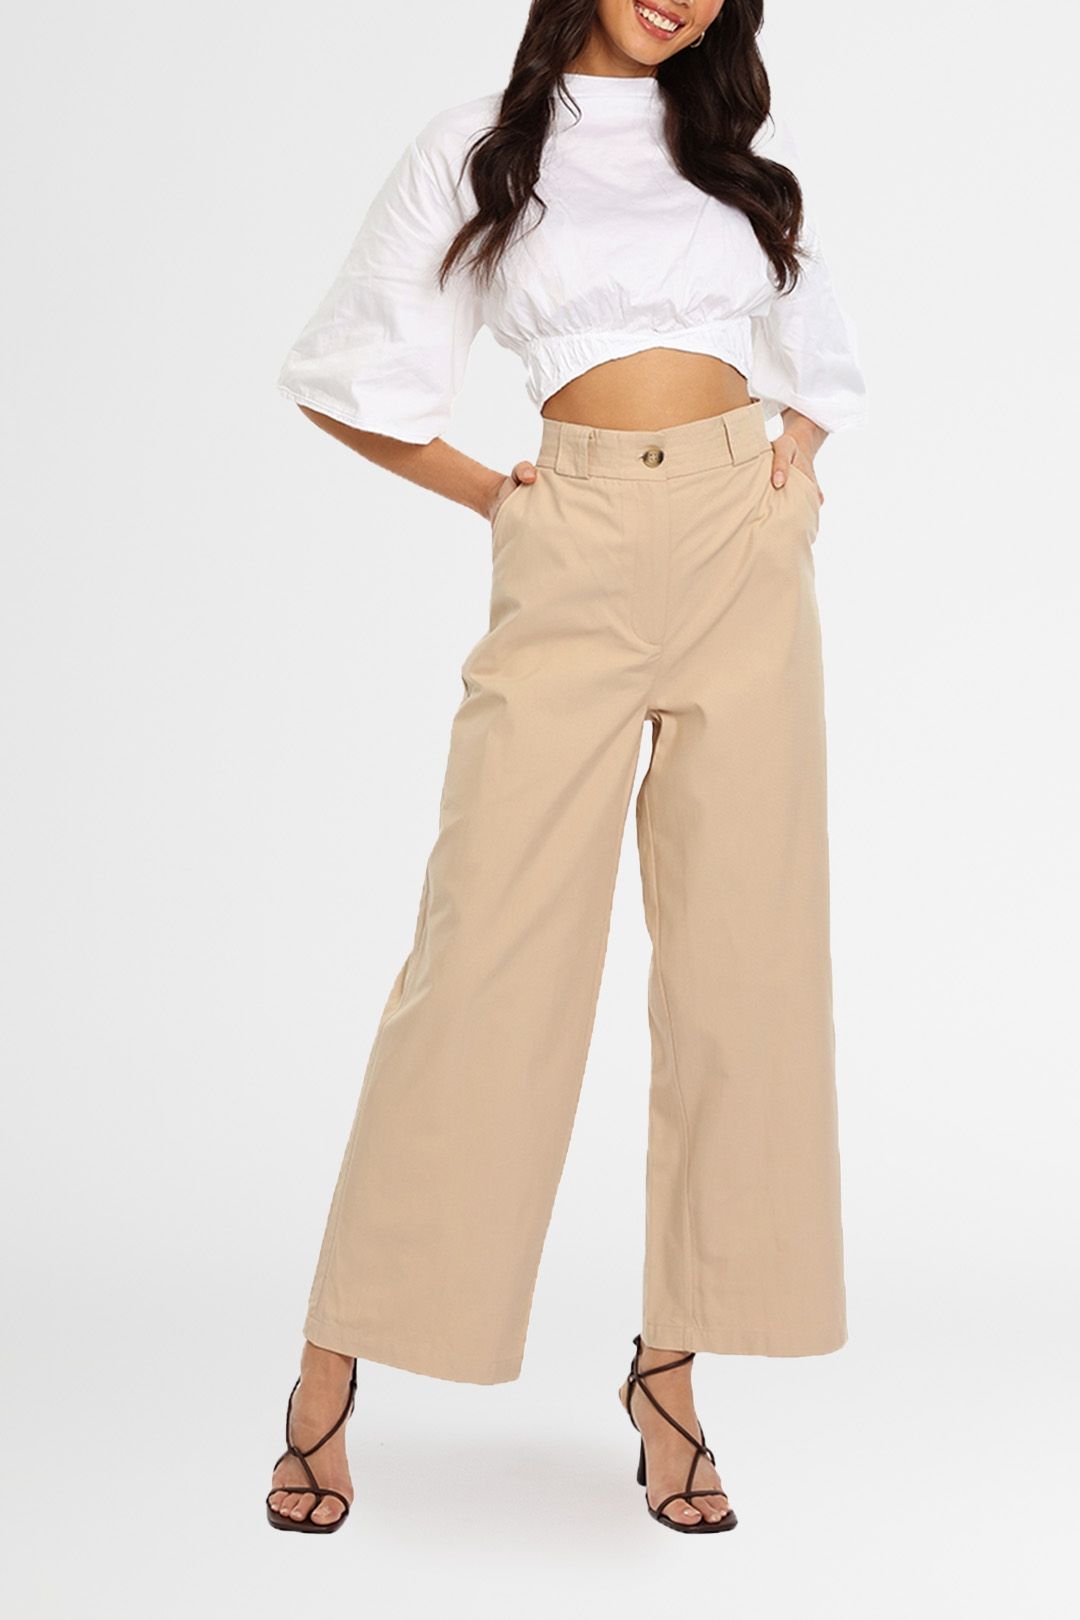 By Johnny Wide Leg Pant Beige